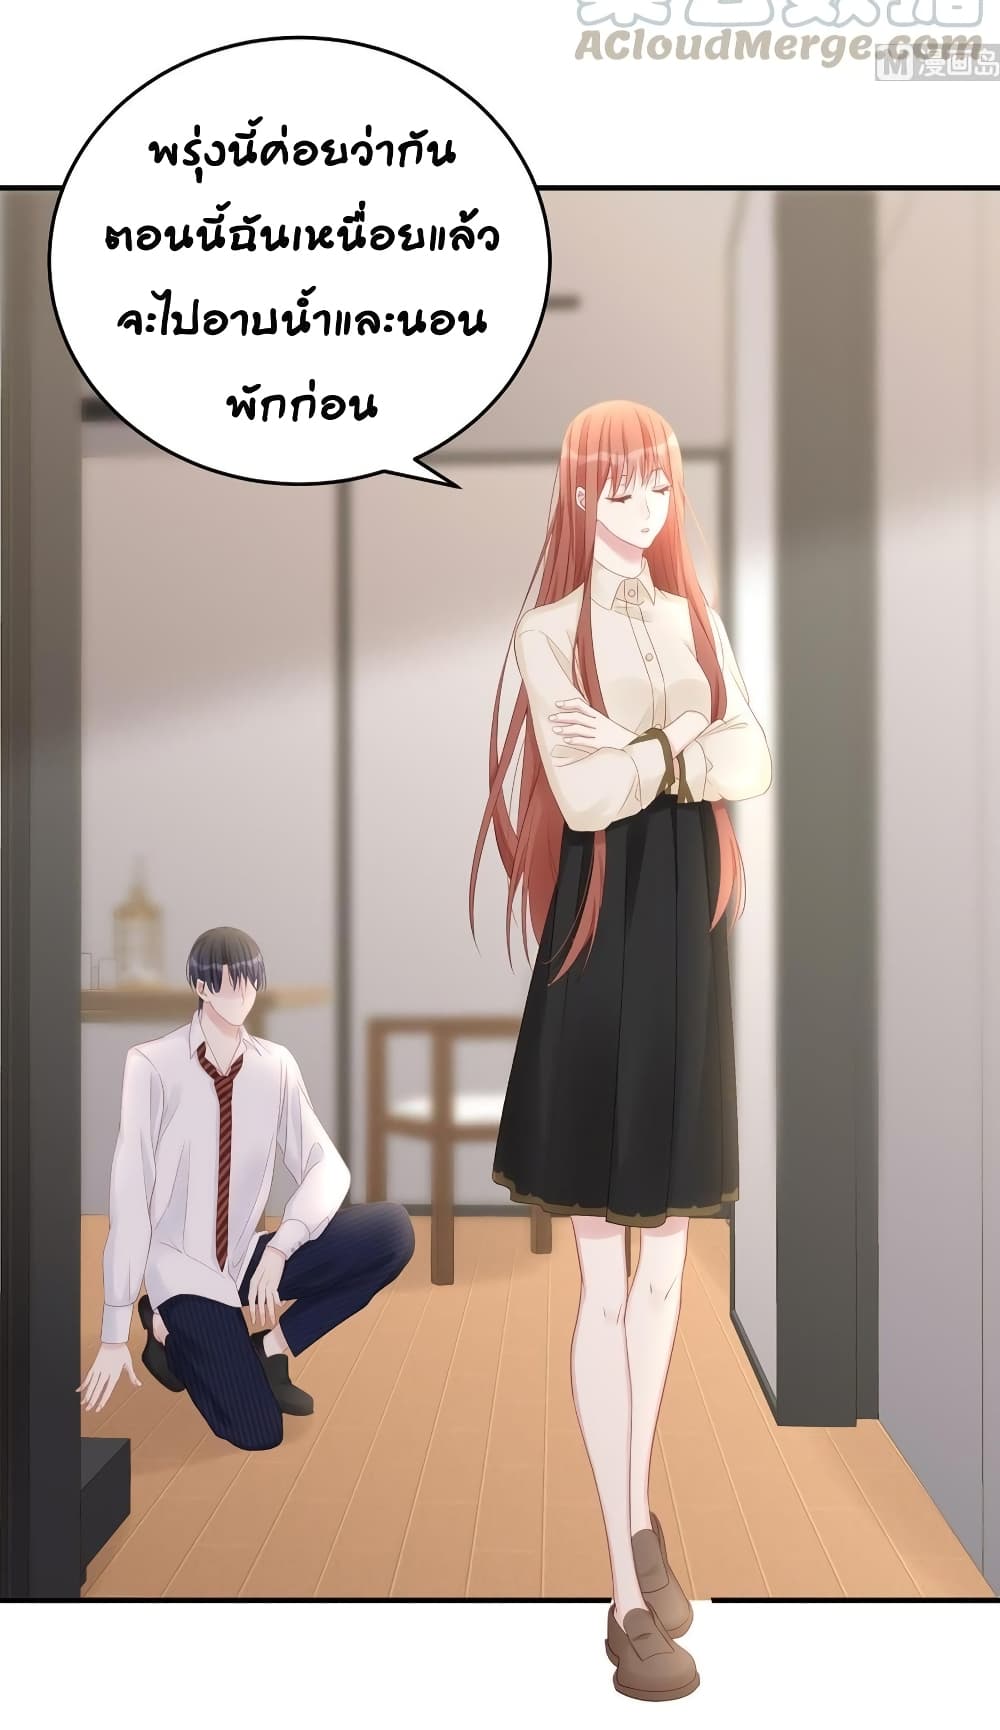 Gonna Spoil You ตอนที่ 77 (4)